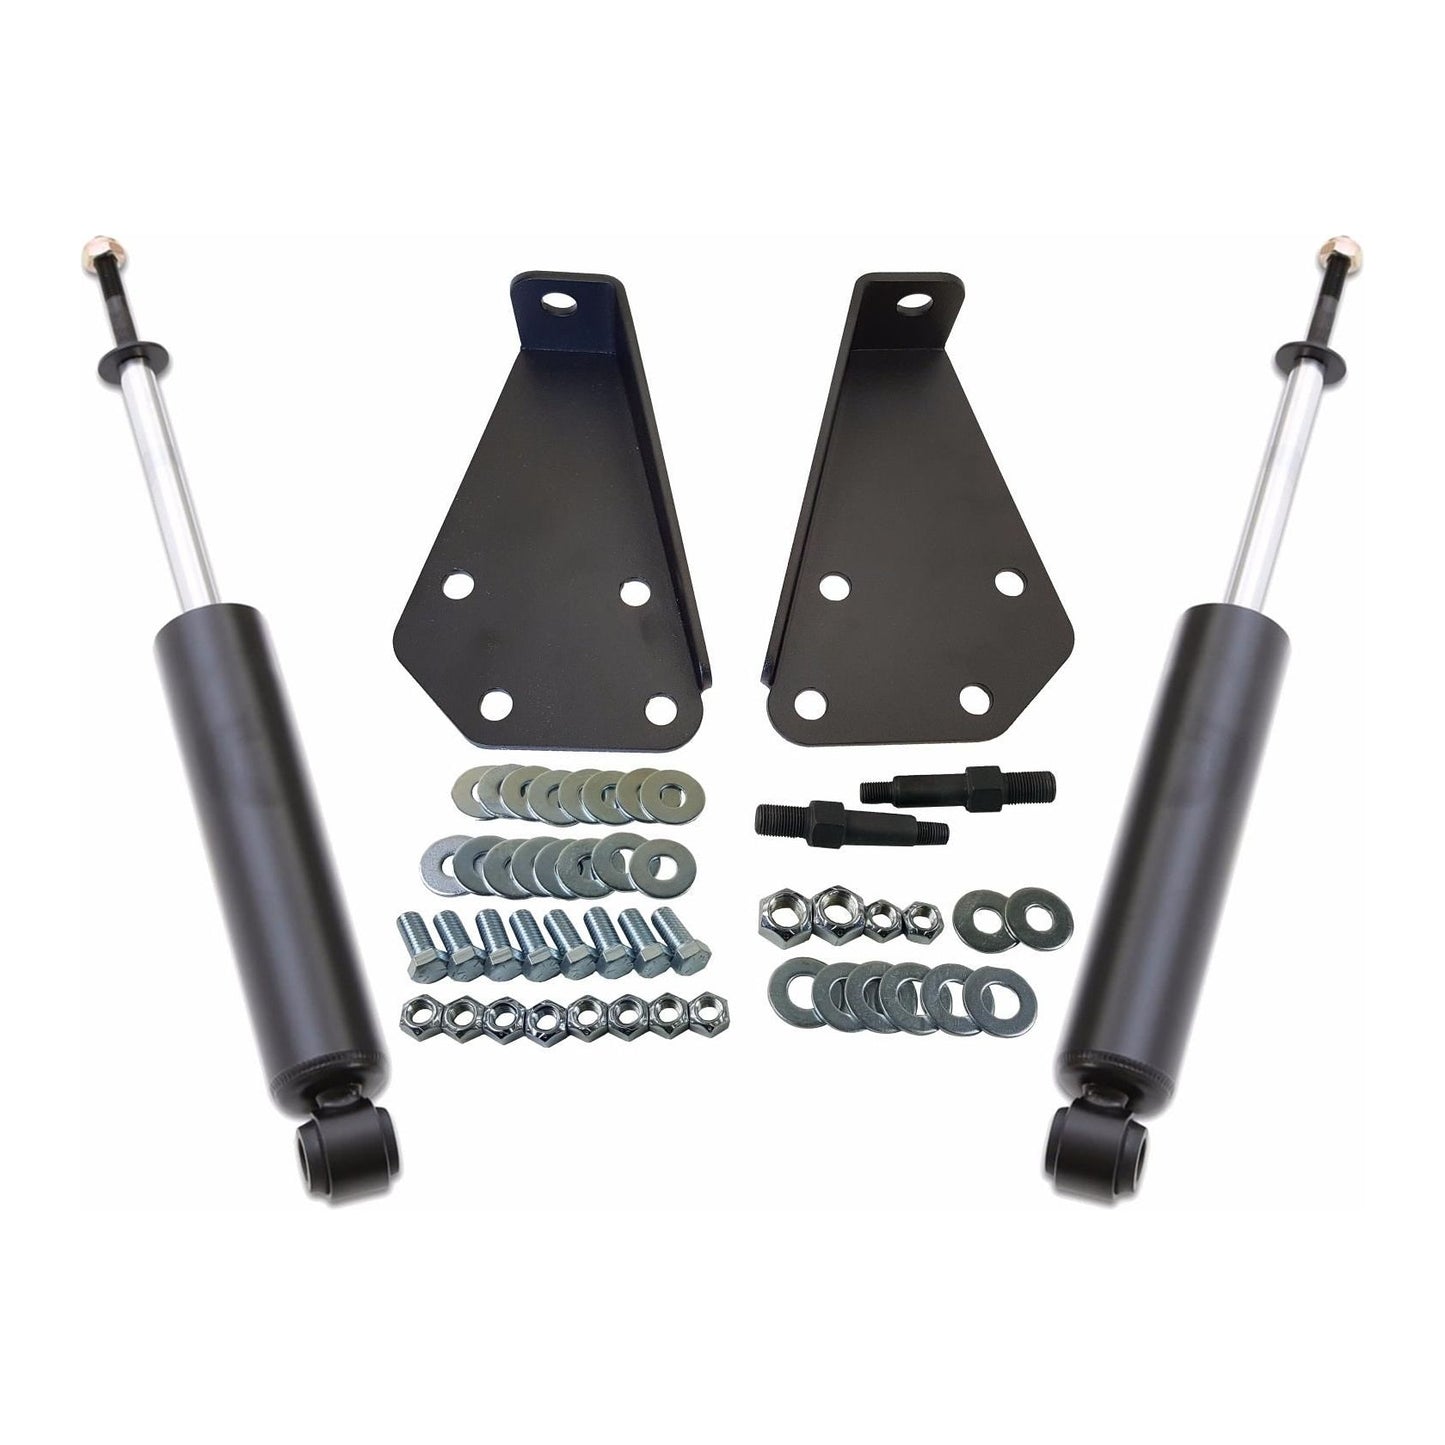 Front Shocks & Relocation Kit Fits 1964-72 Chevy Chevelle A-Body